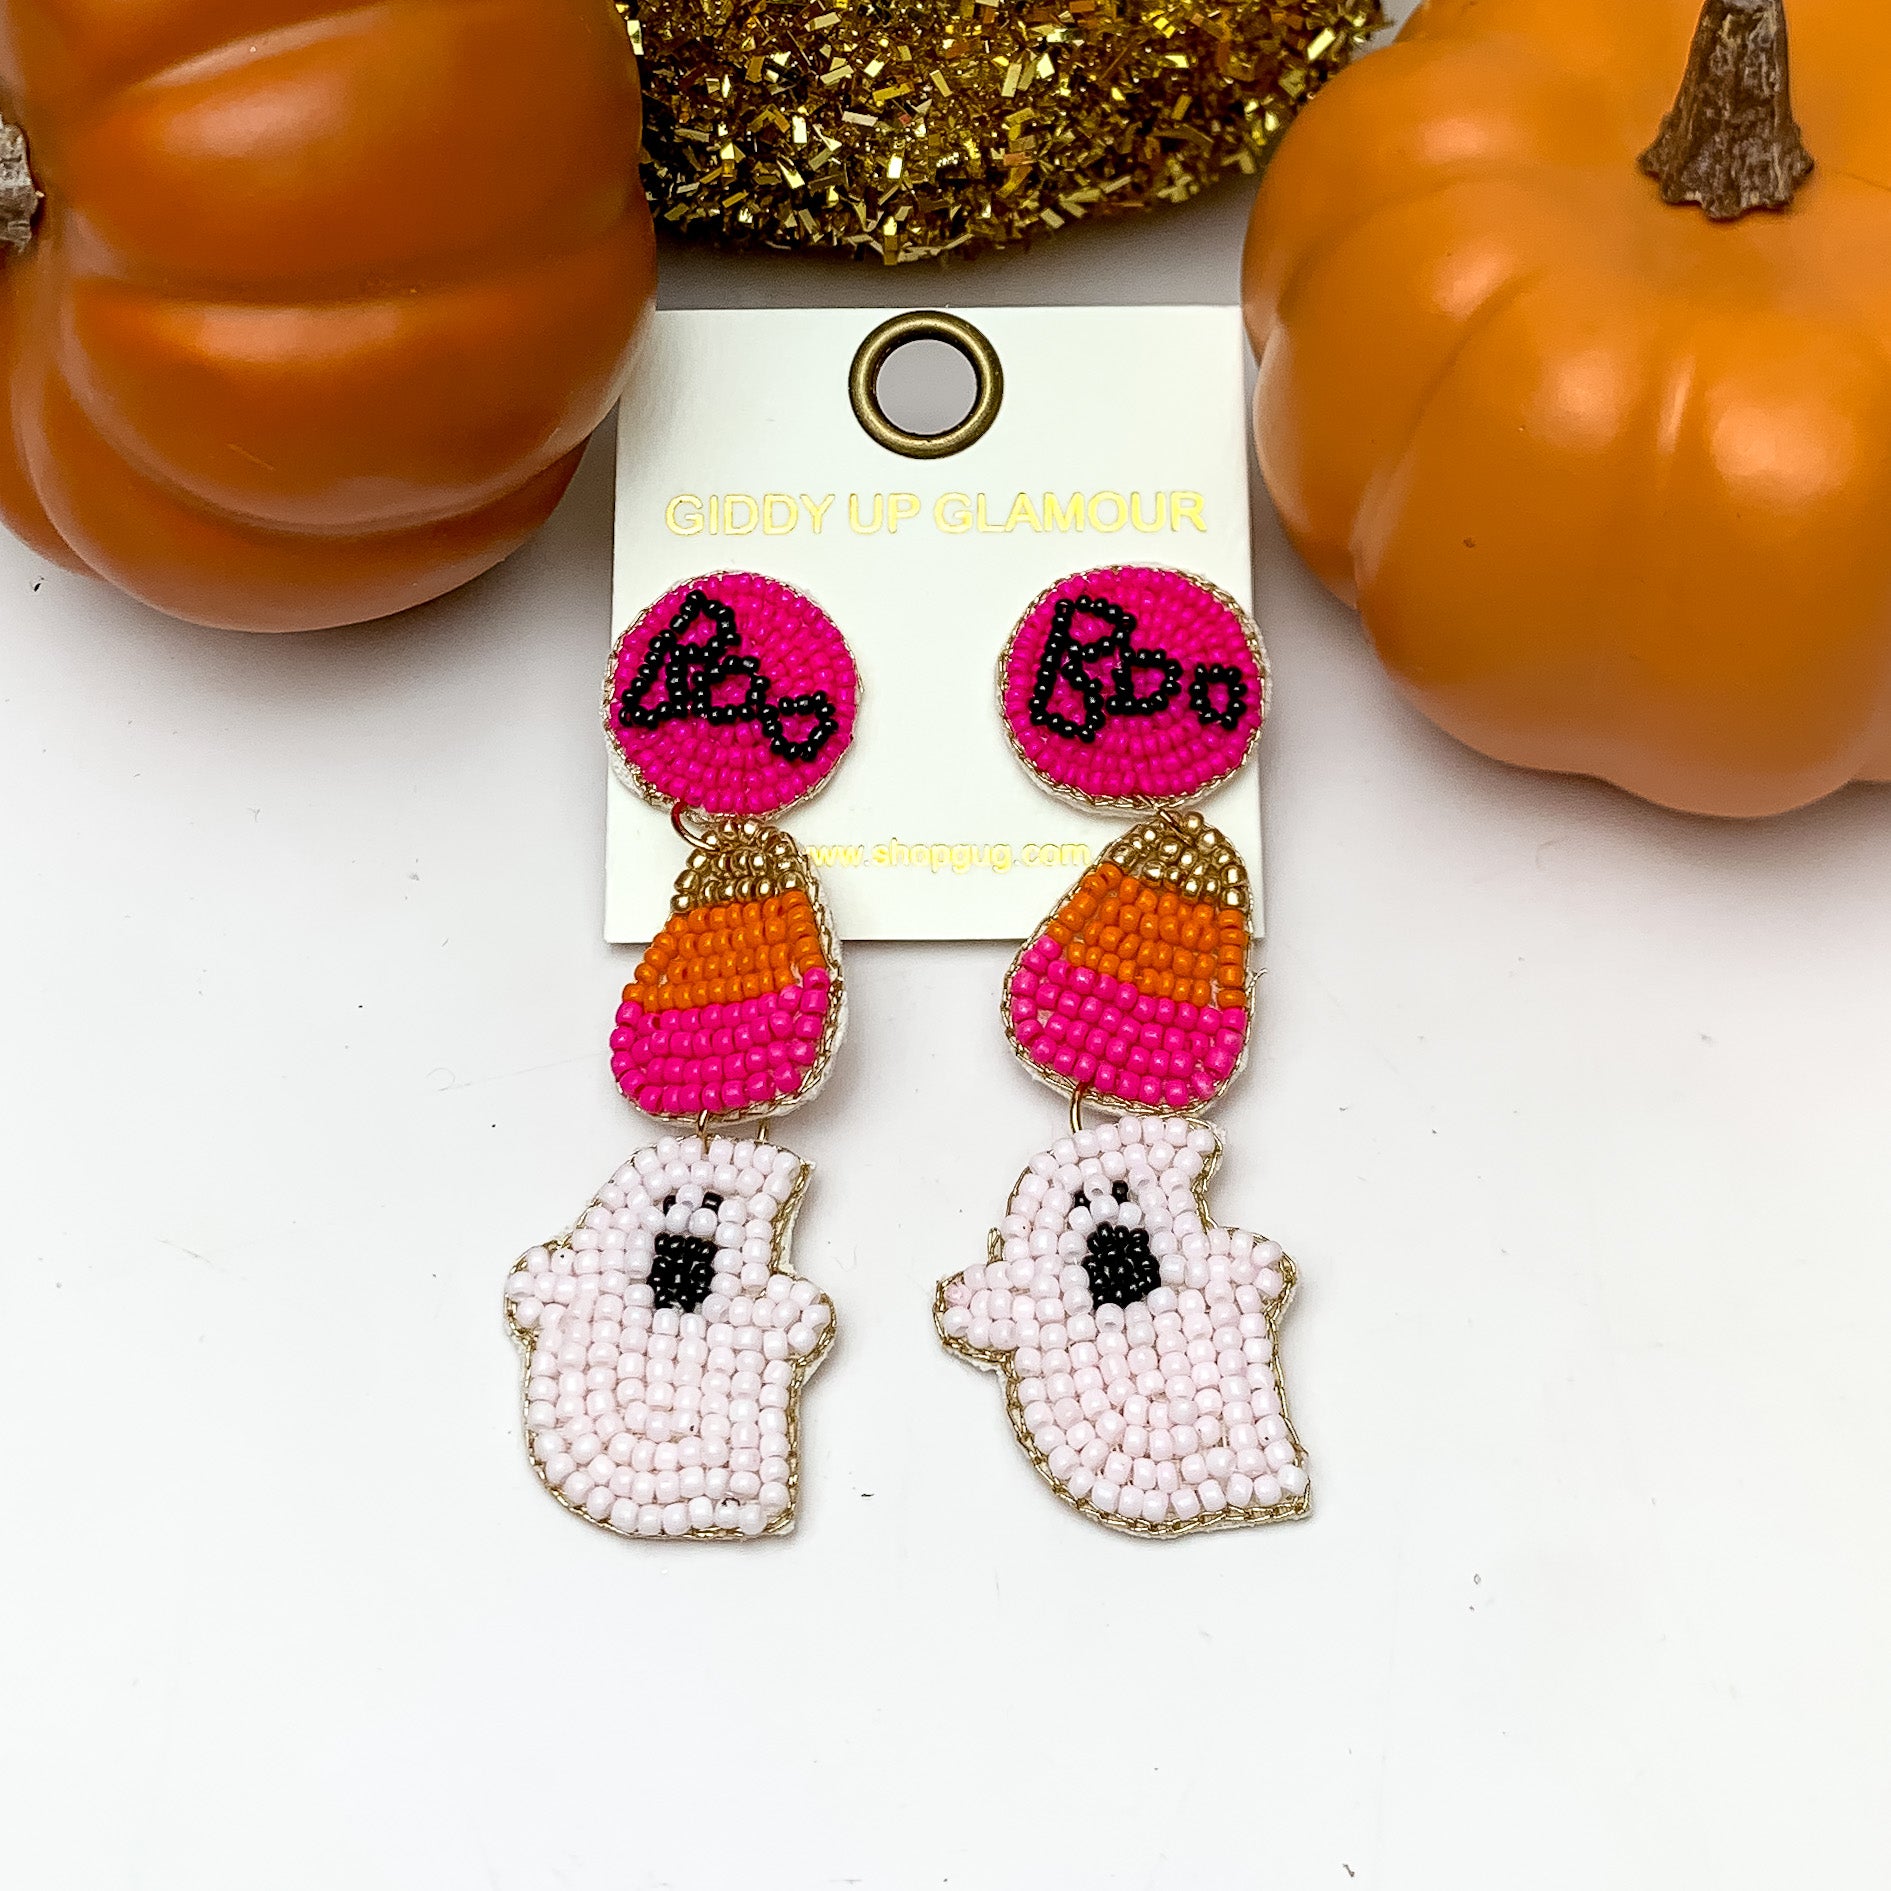 Three Tier Halloween Themed Beaded Earrings in Pink and Orange. These earrings are pictured on a white background with pumpkins behind the earrings.